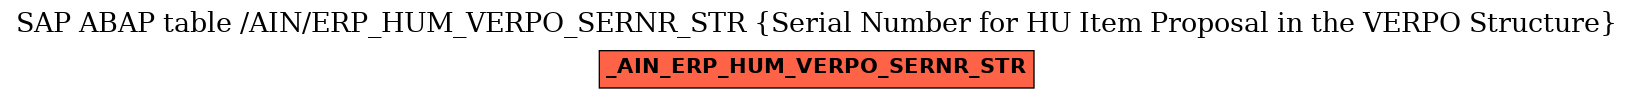 E-R Diagram for table /AIN/ERP_HUM_VERPO_SERNR_STR (Serial Number for HU Item Proposal in the VERPO Structure)